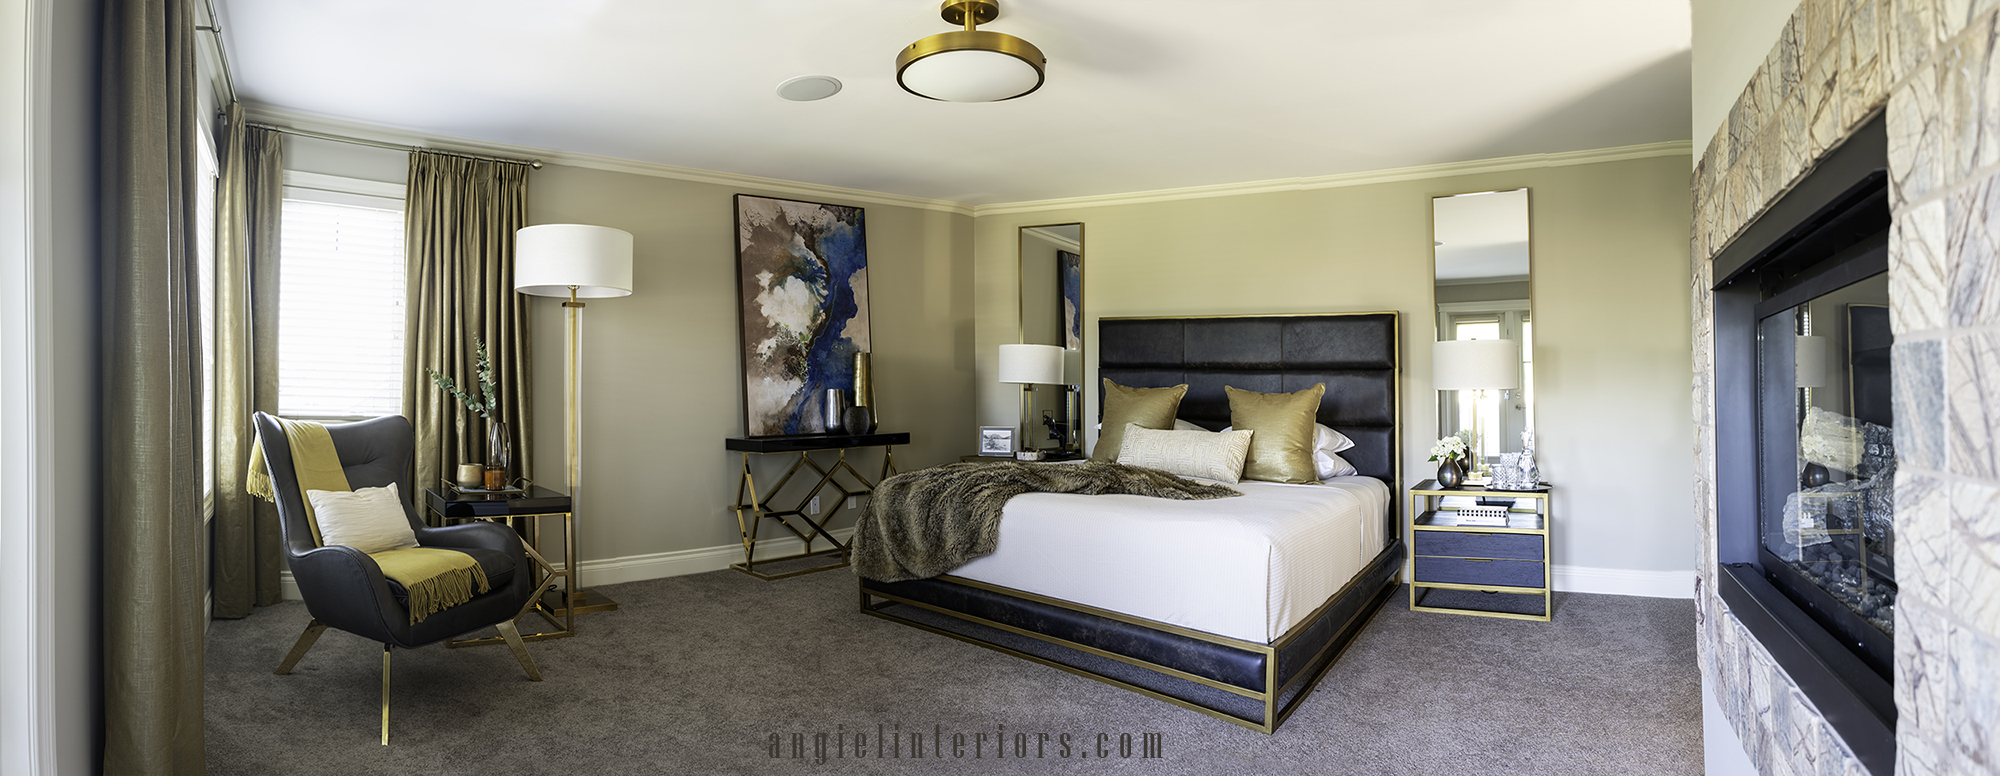 bedroom with modern bed, gold mirrors, geometric gold and black console table and oversized abstract painting